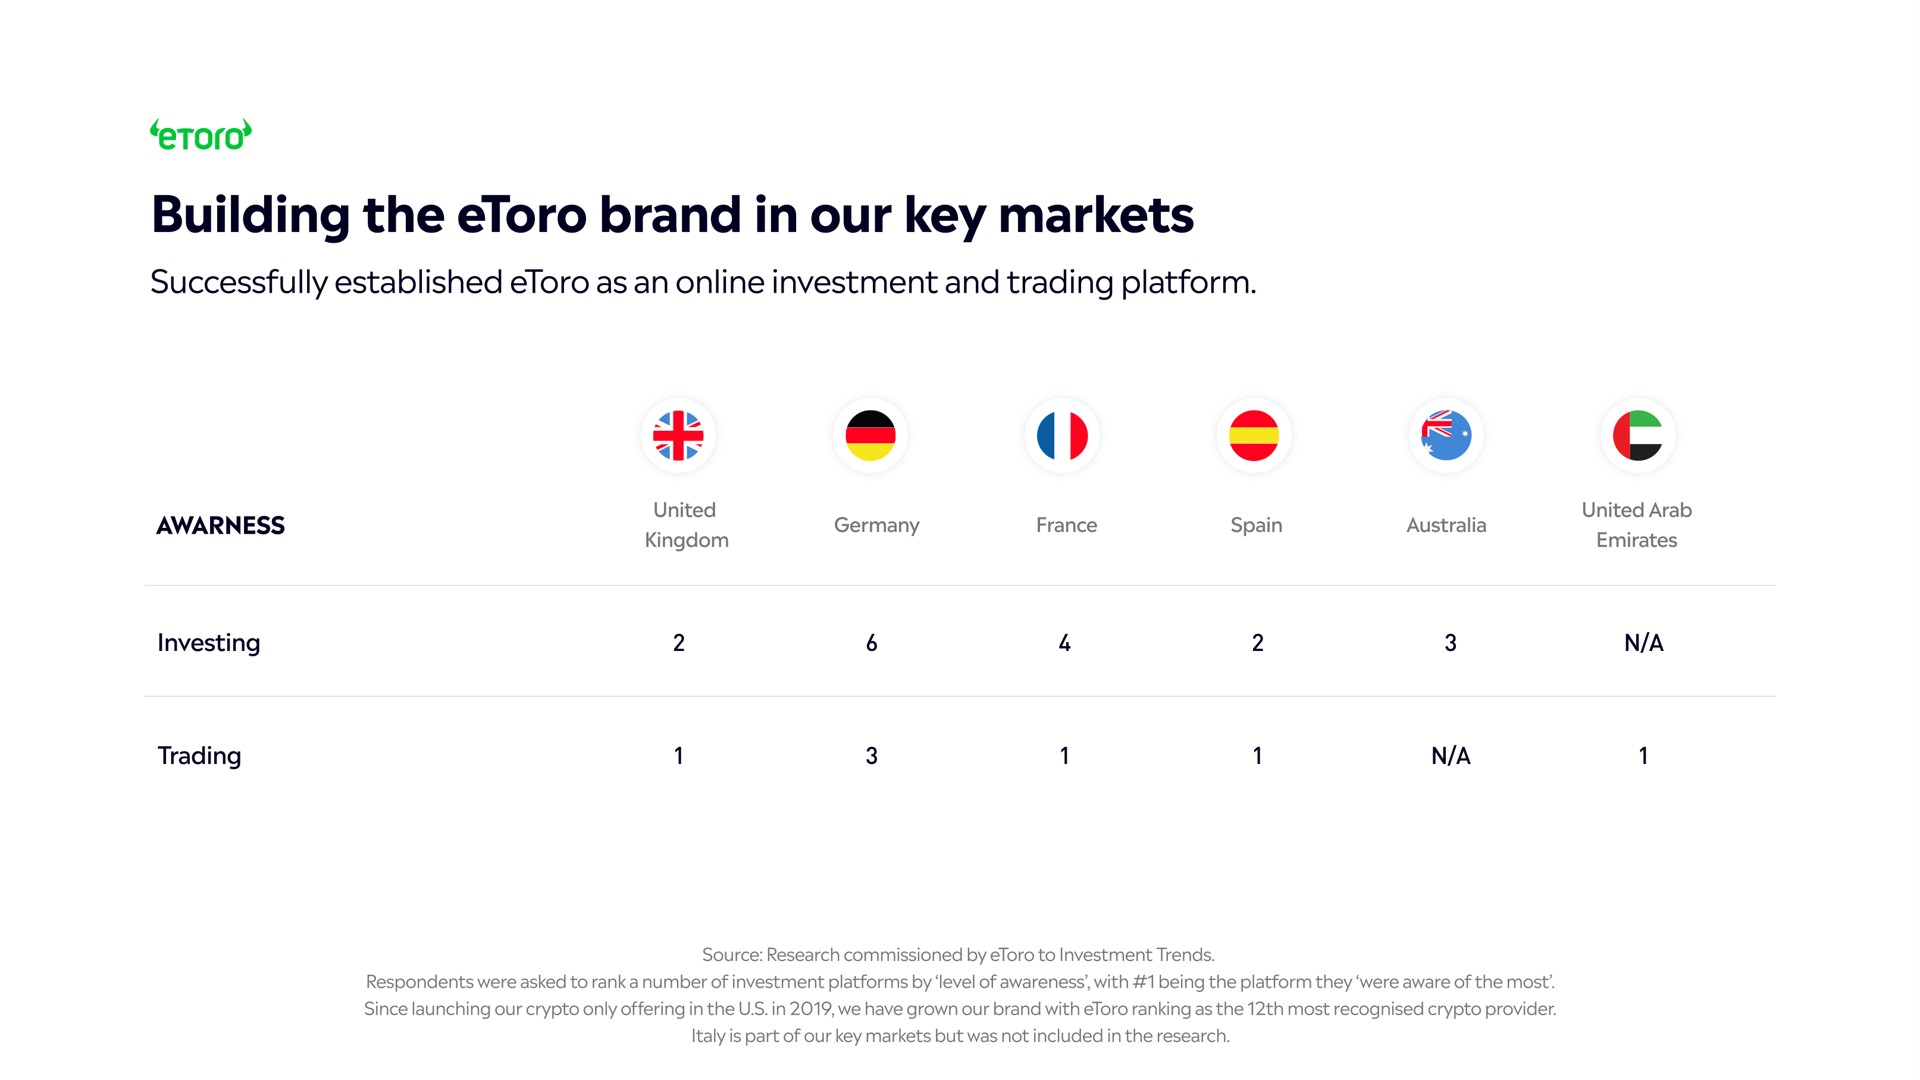 building the brand in our key markets united | eToro